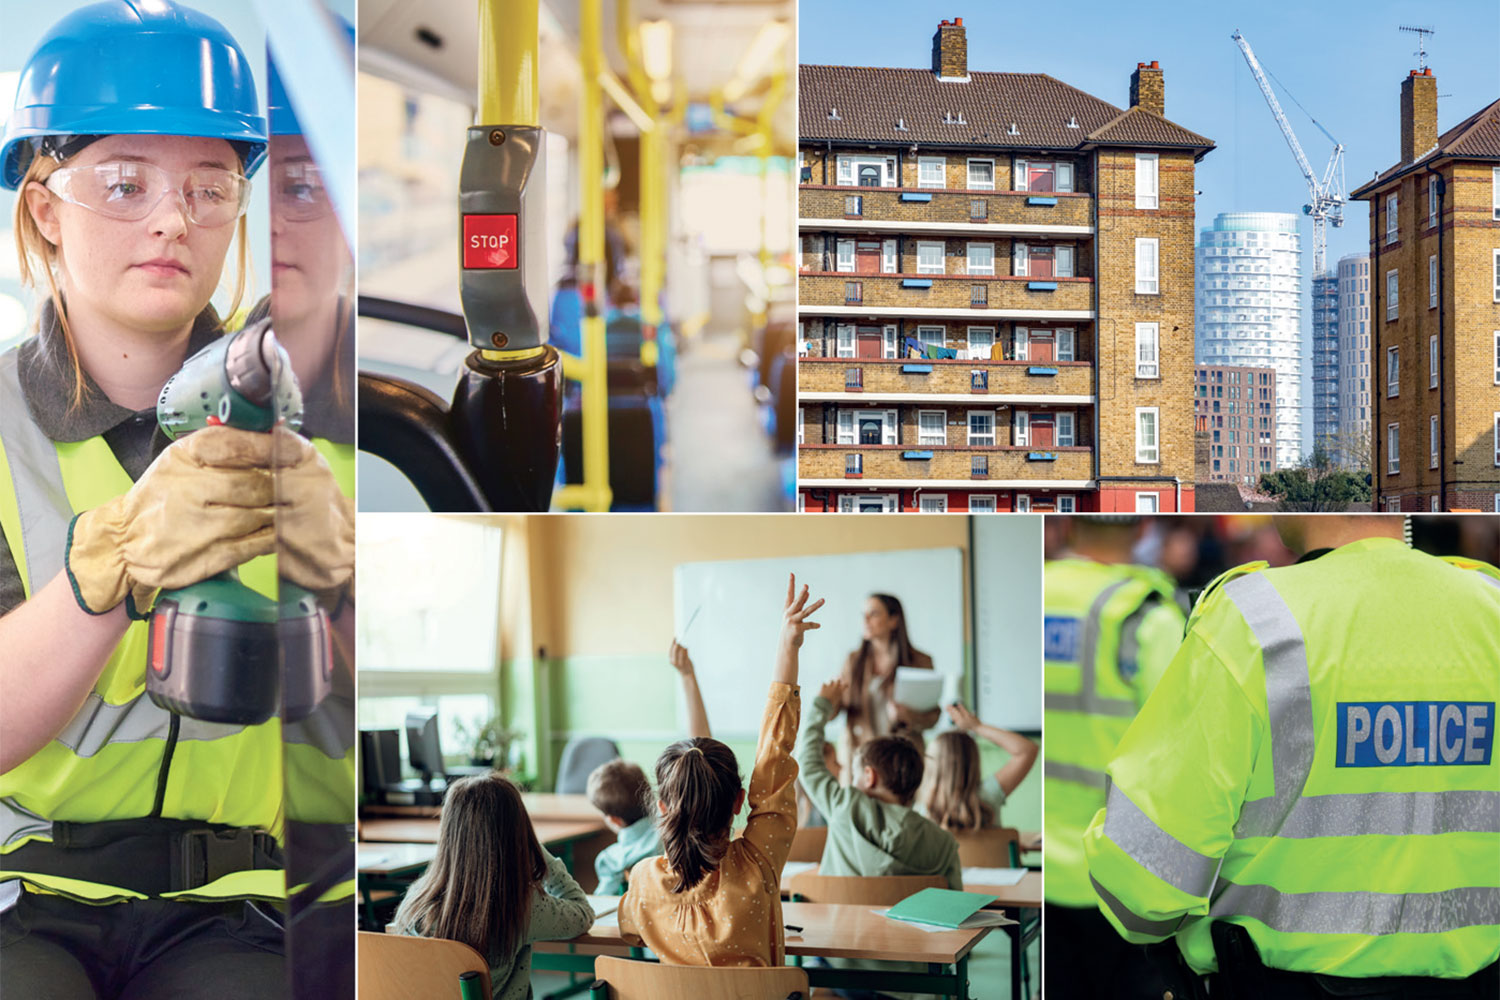 montage of photos – female apprentice in high vis jacket and protective glasses using a power tool; interior of bus; pupils with hands up in a school classroom; rear view of police officers in high vis jackets; social housing flats with new build and cranes in background